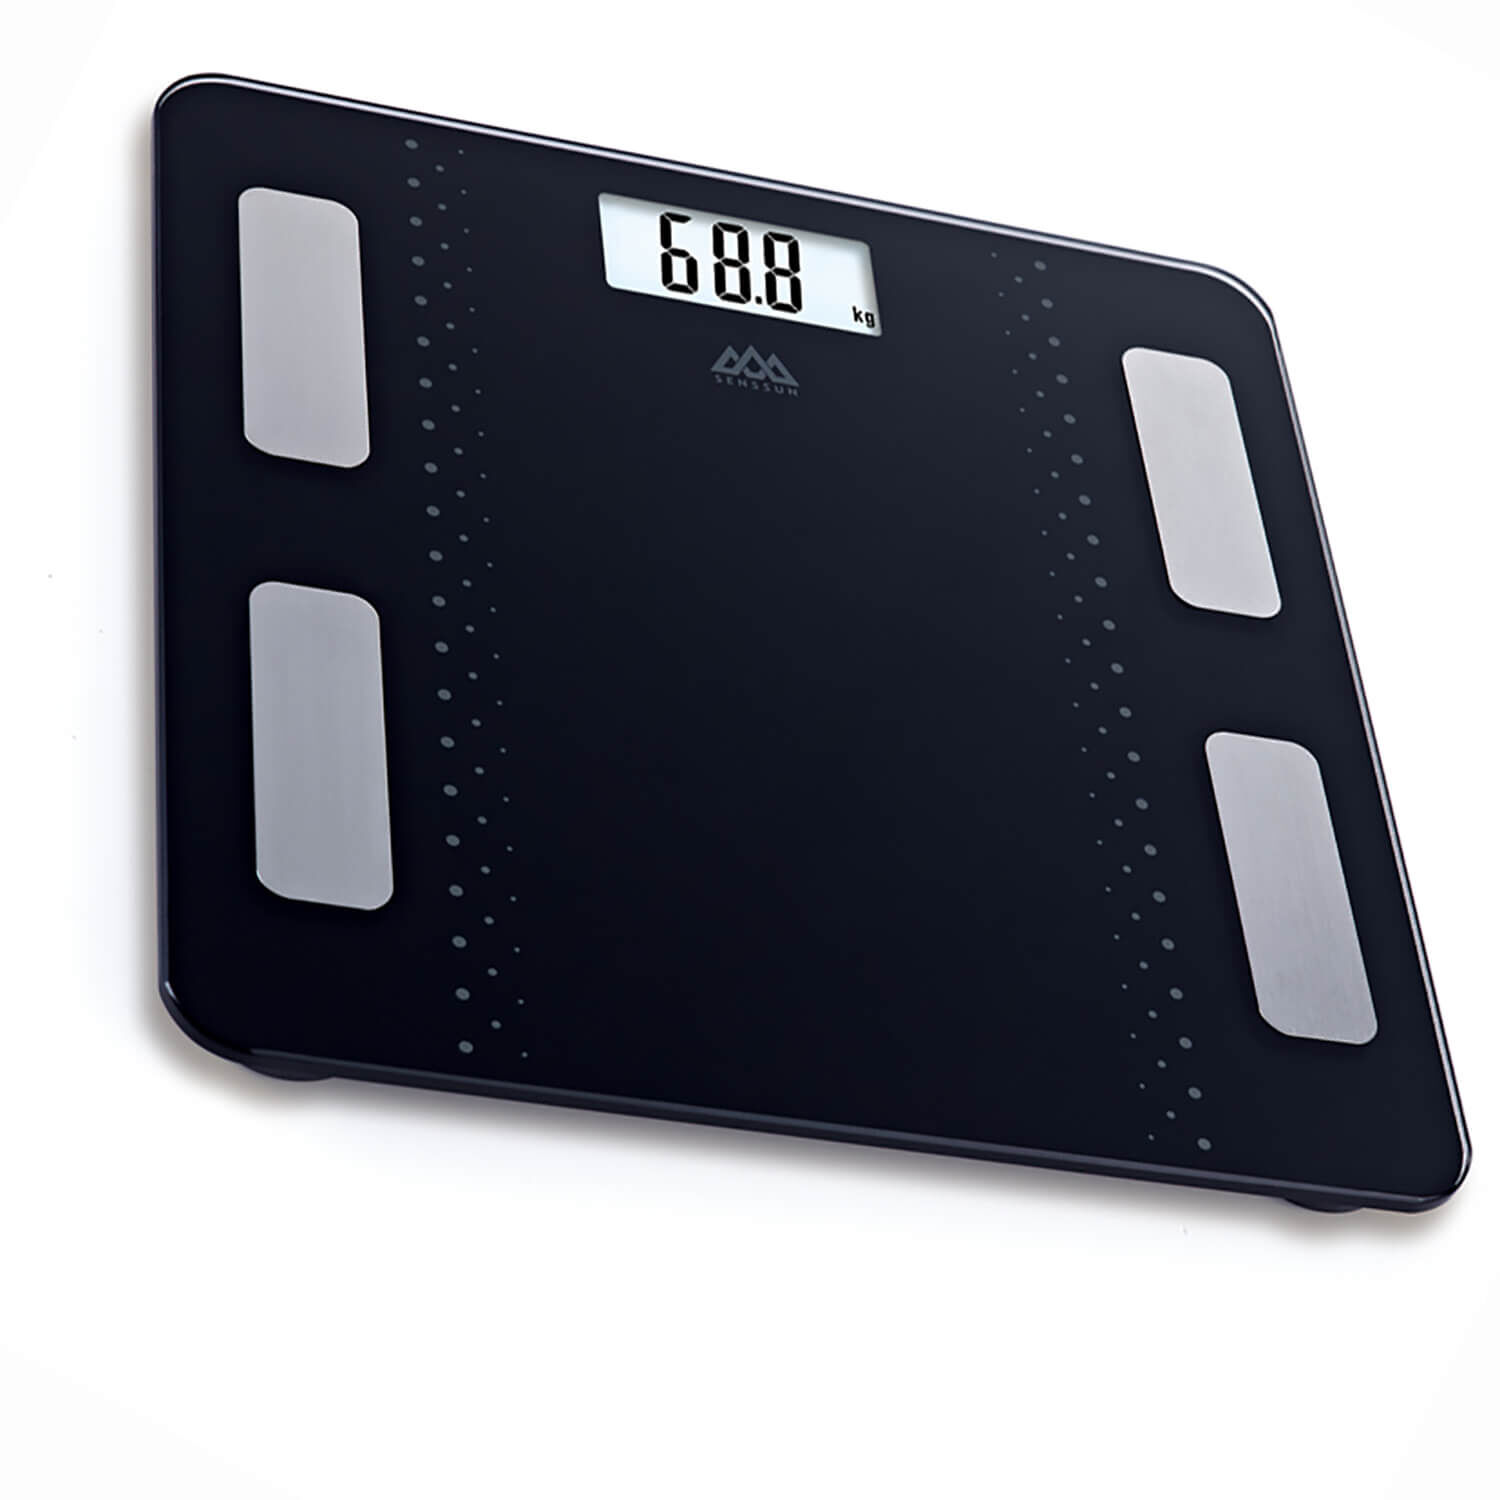 https://www.homestoreandmore.ie/dw/image/v2/BCBN_PRD/on/demandware.static/-/Sites-master/default/dw665c873e/images/Camry-Body-Analyser-Bluetooth-Scale-bathroom-scales-111108-hi-res-2.jpg?sw=1500